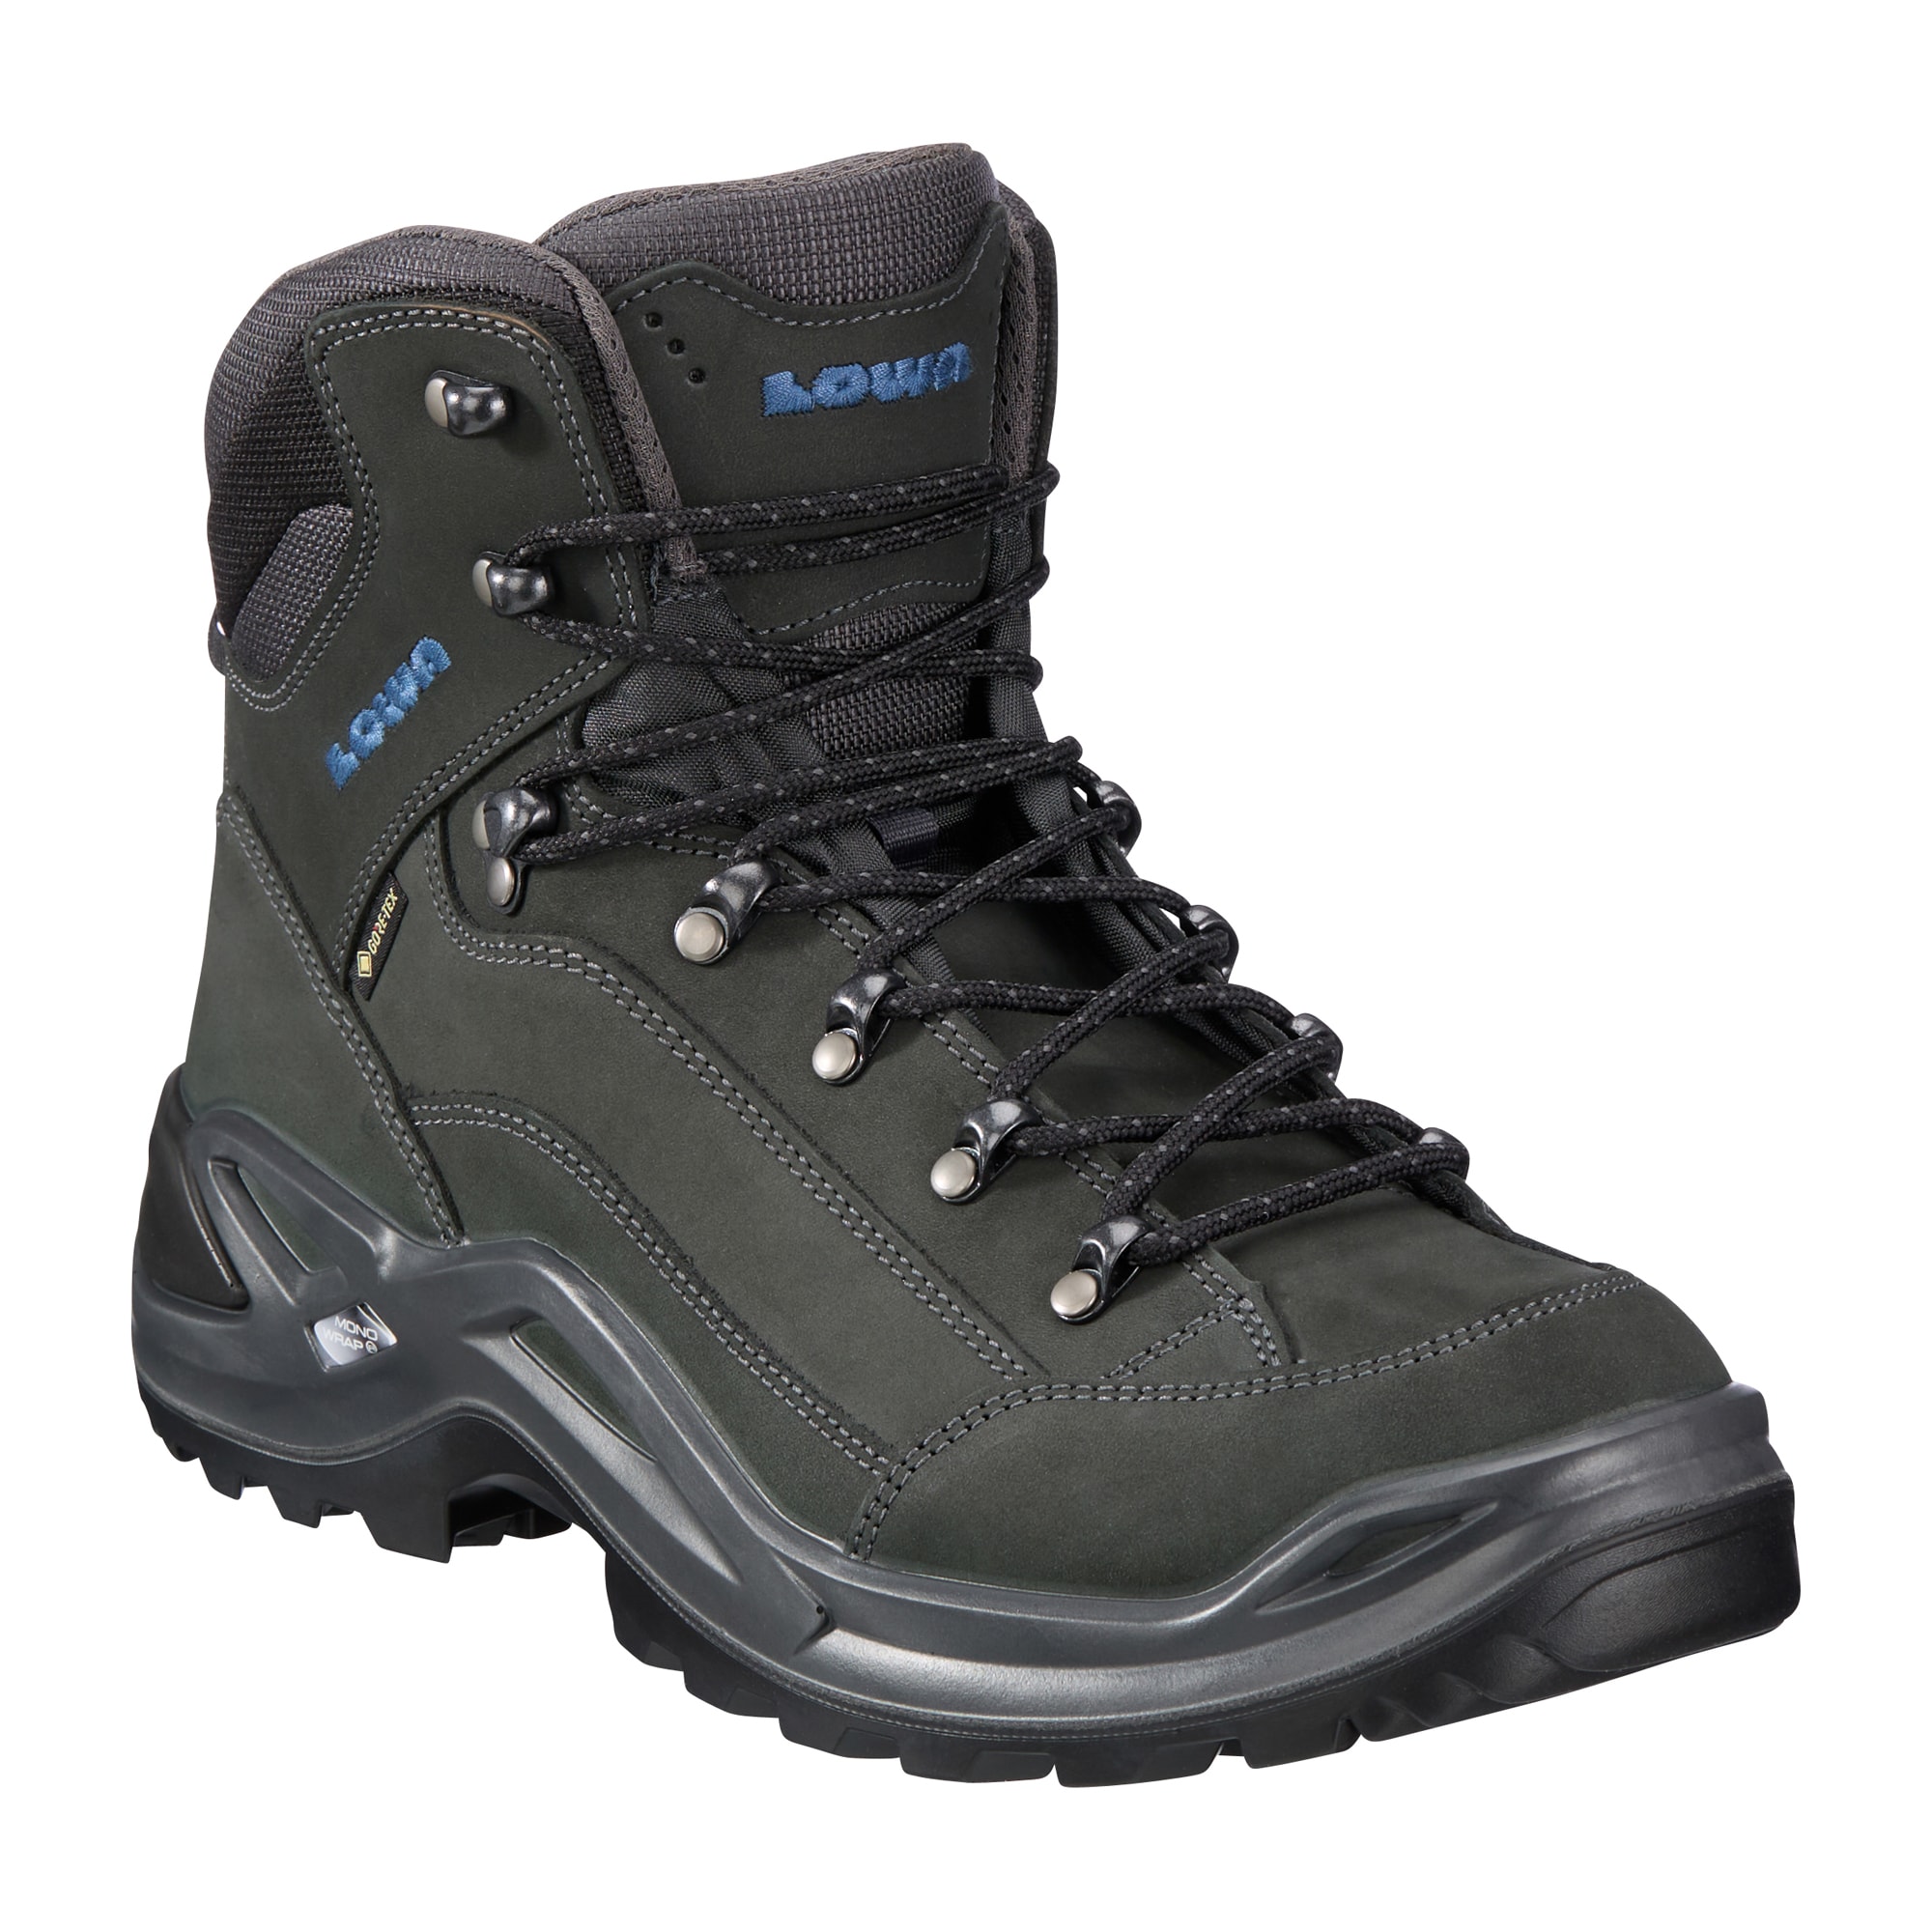 the LOWA Renegade GTX Mid anthracite steel b